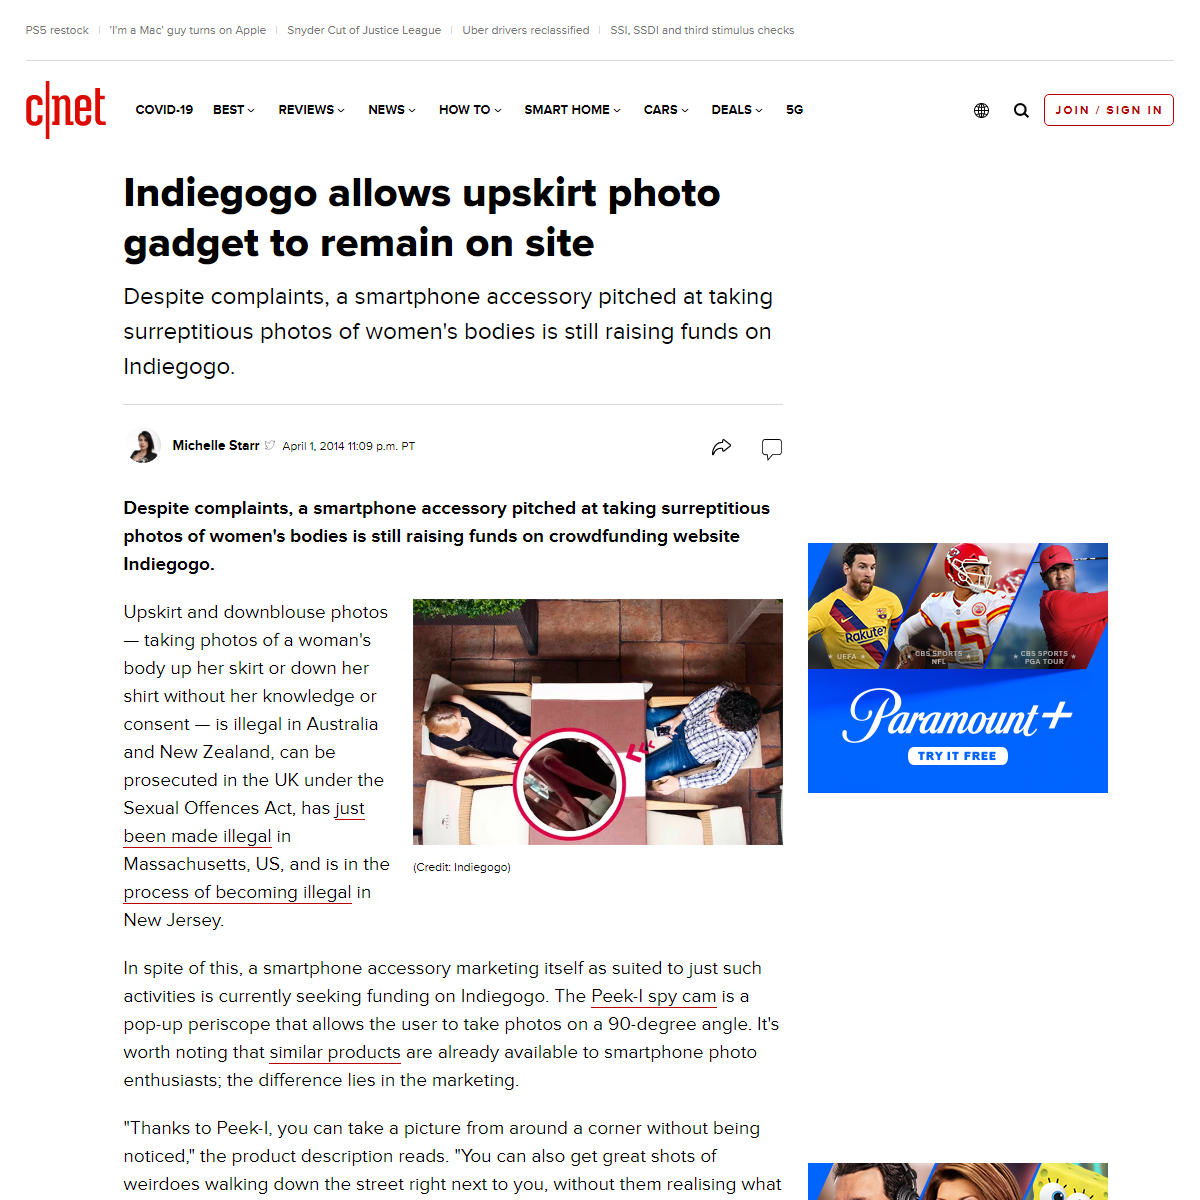 A complete backup of https://www.cnet.com/news/indiegogo-allows-upskirt-photo-gadget-to-remain-on-site/